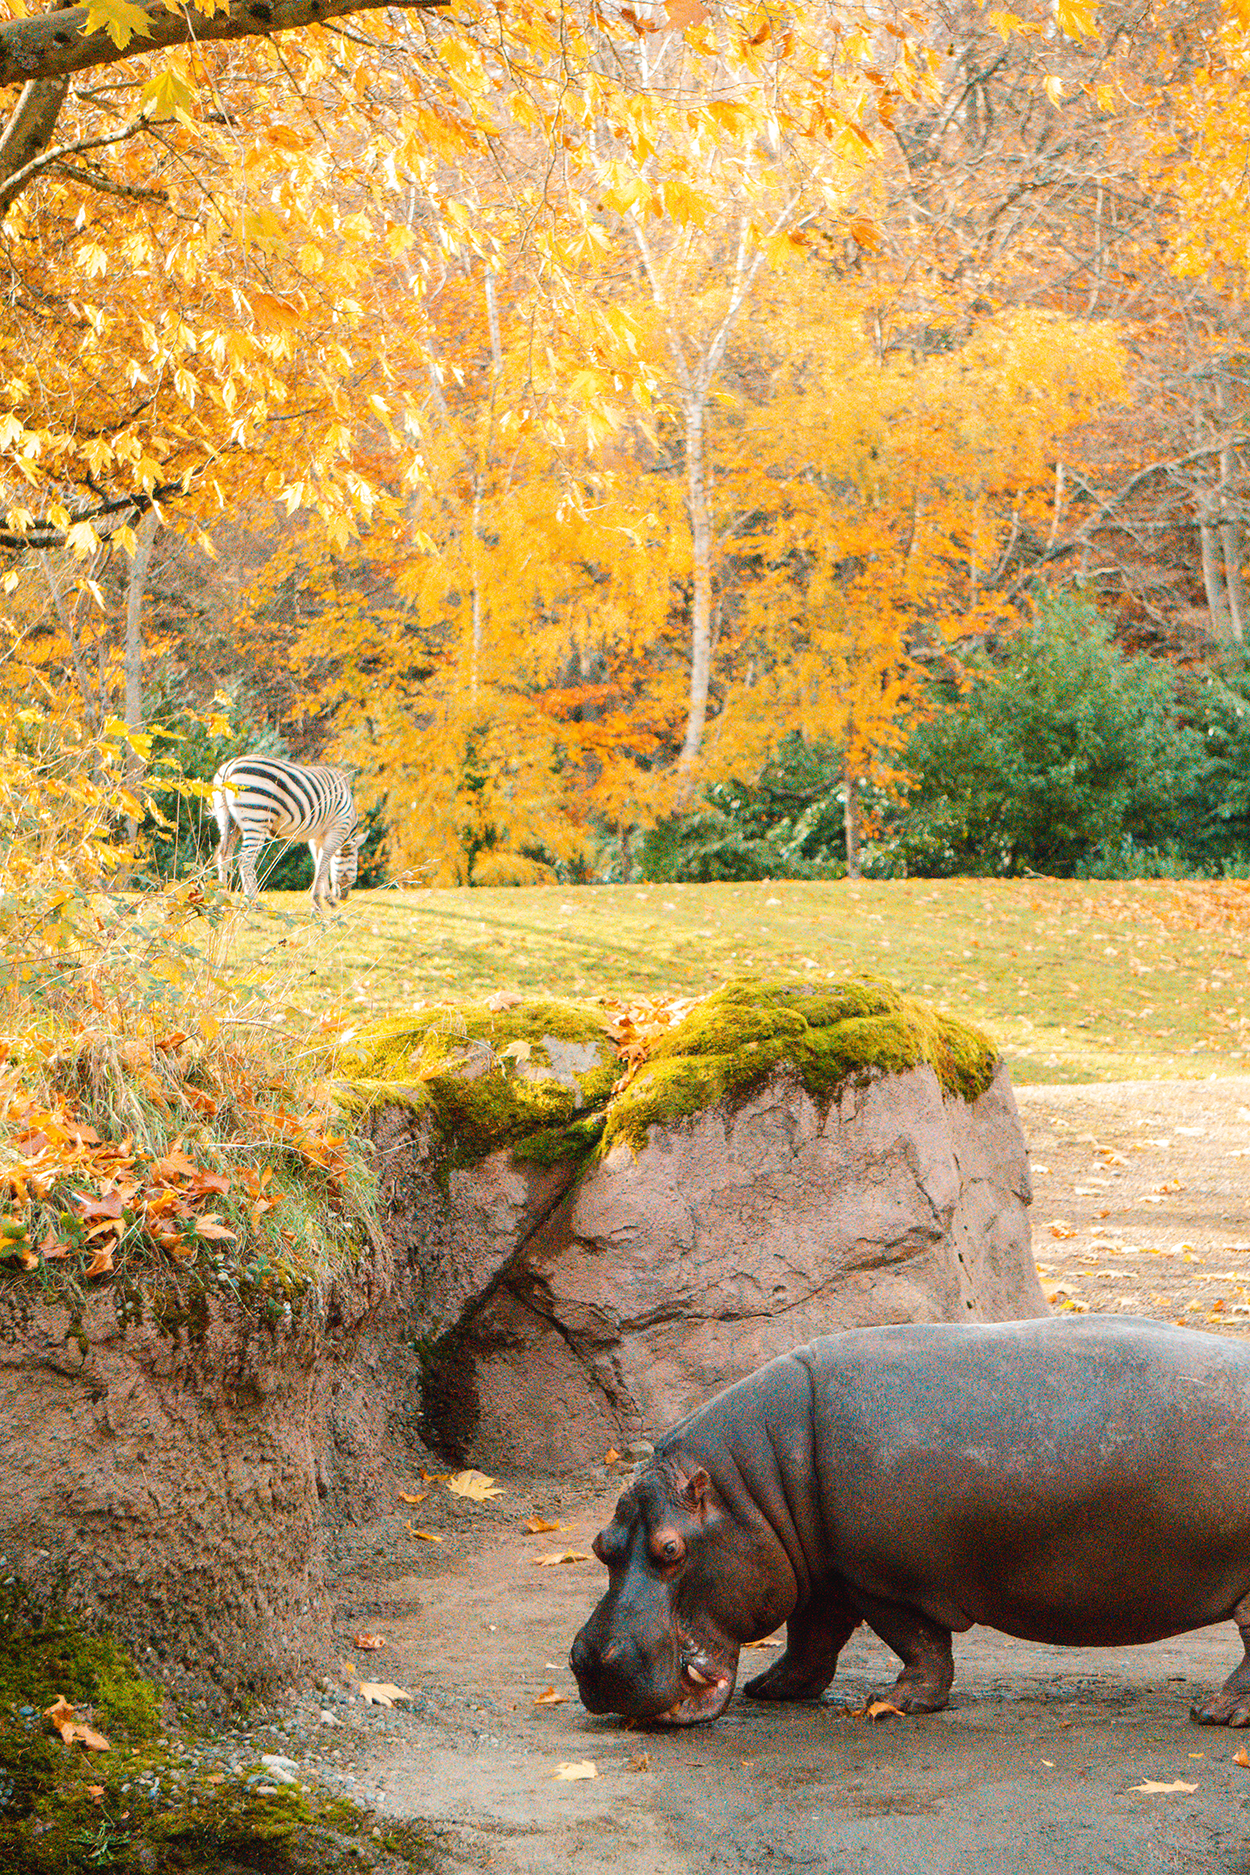 Hippo and zebra on the African Savanna in Woodland Park Zoo- photo credit keryn means Twist Travel Magazine